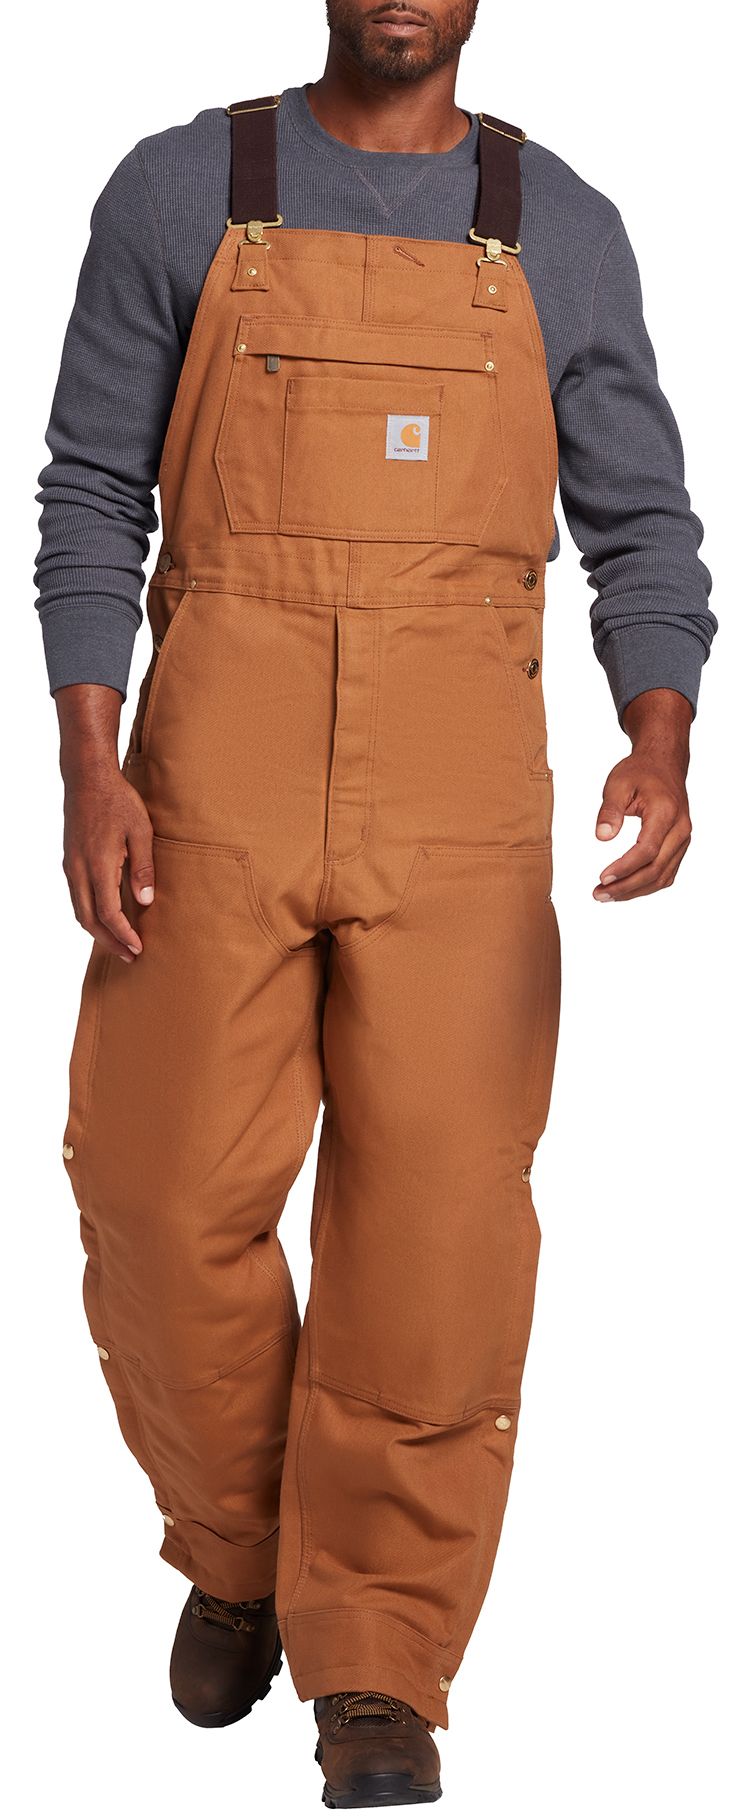 Photos - Ski Wear Carhartt Men's Loose Fit Firm Duck Insulated Bib Overalls, Small, 